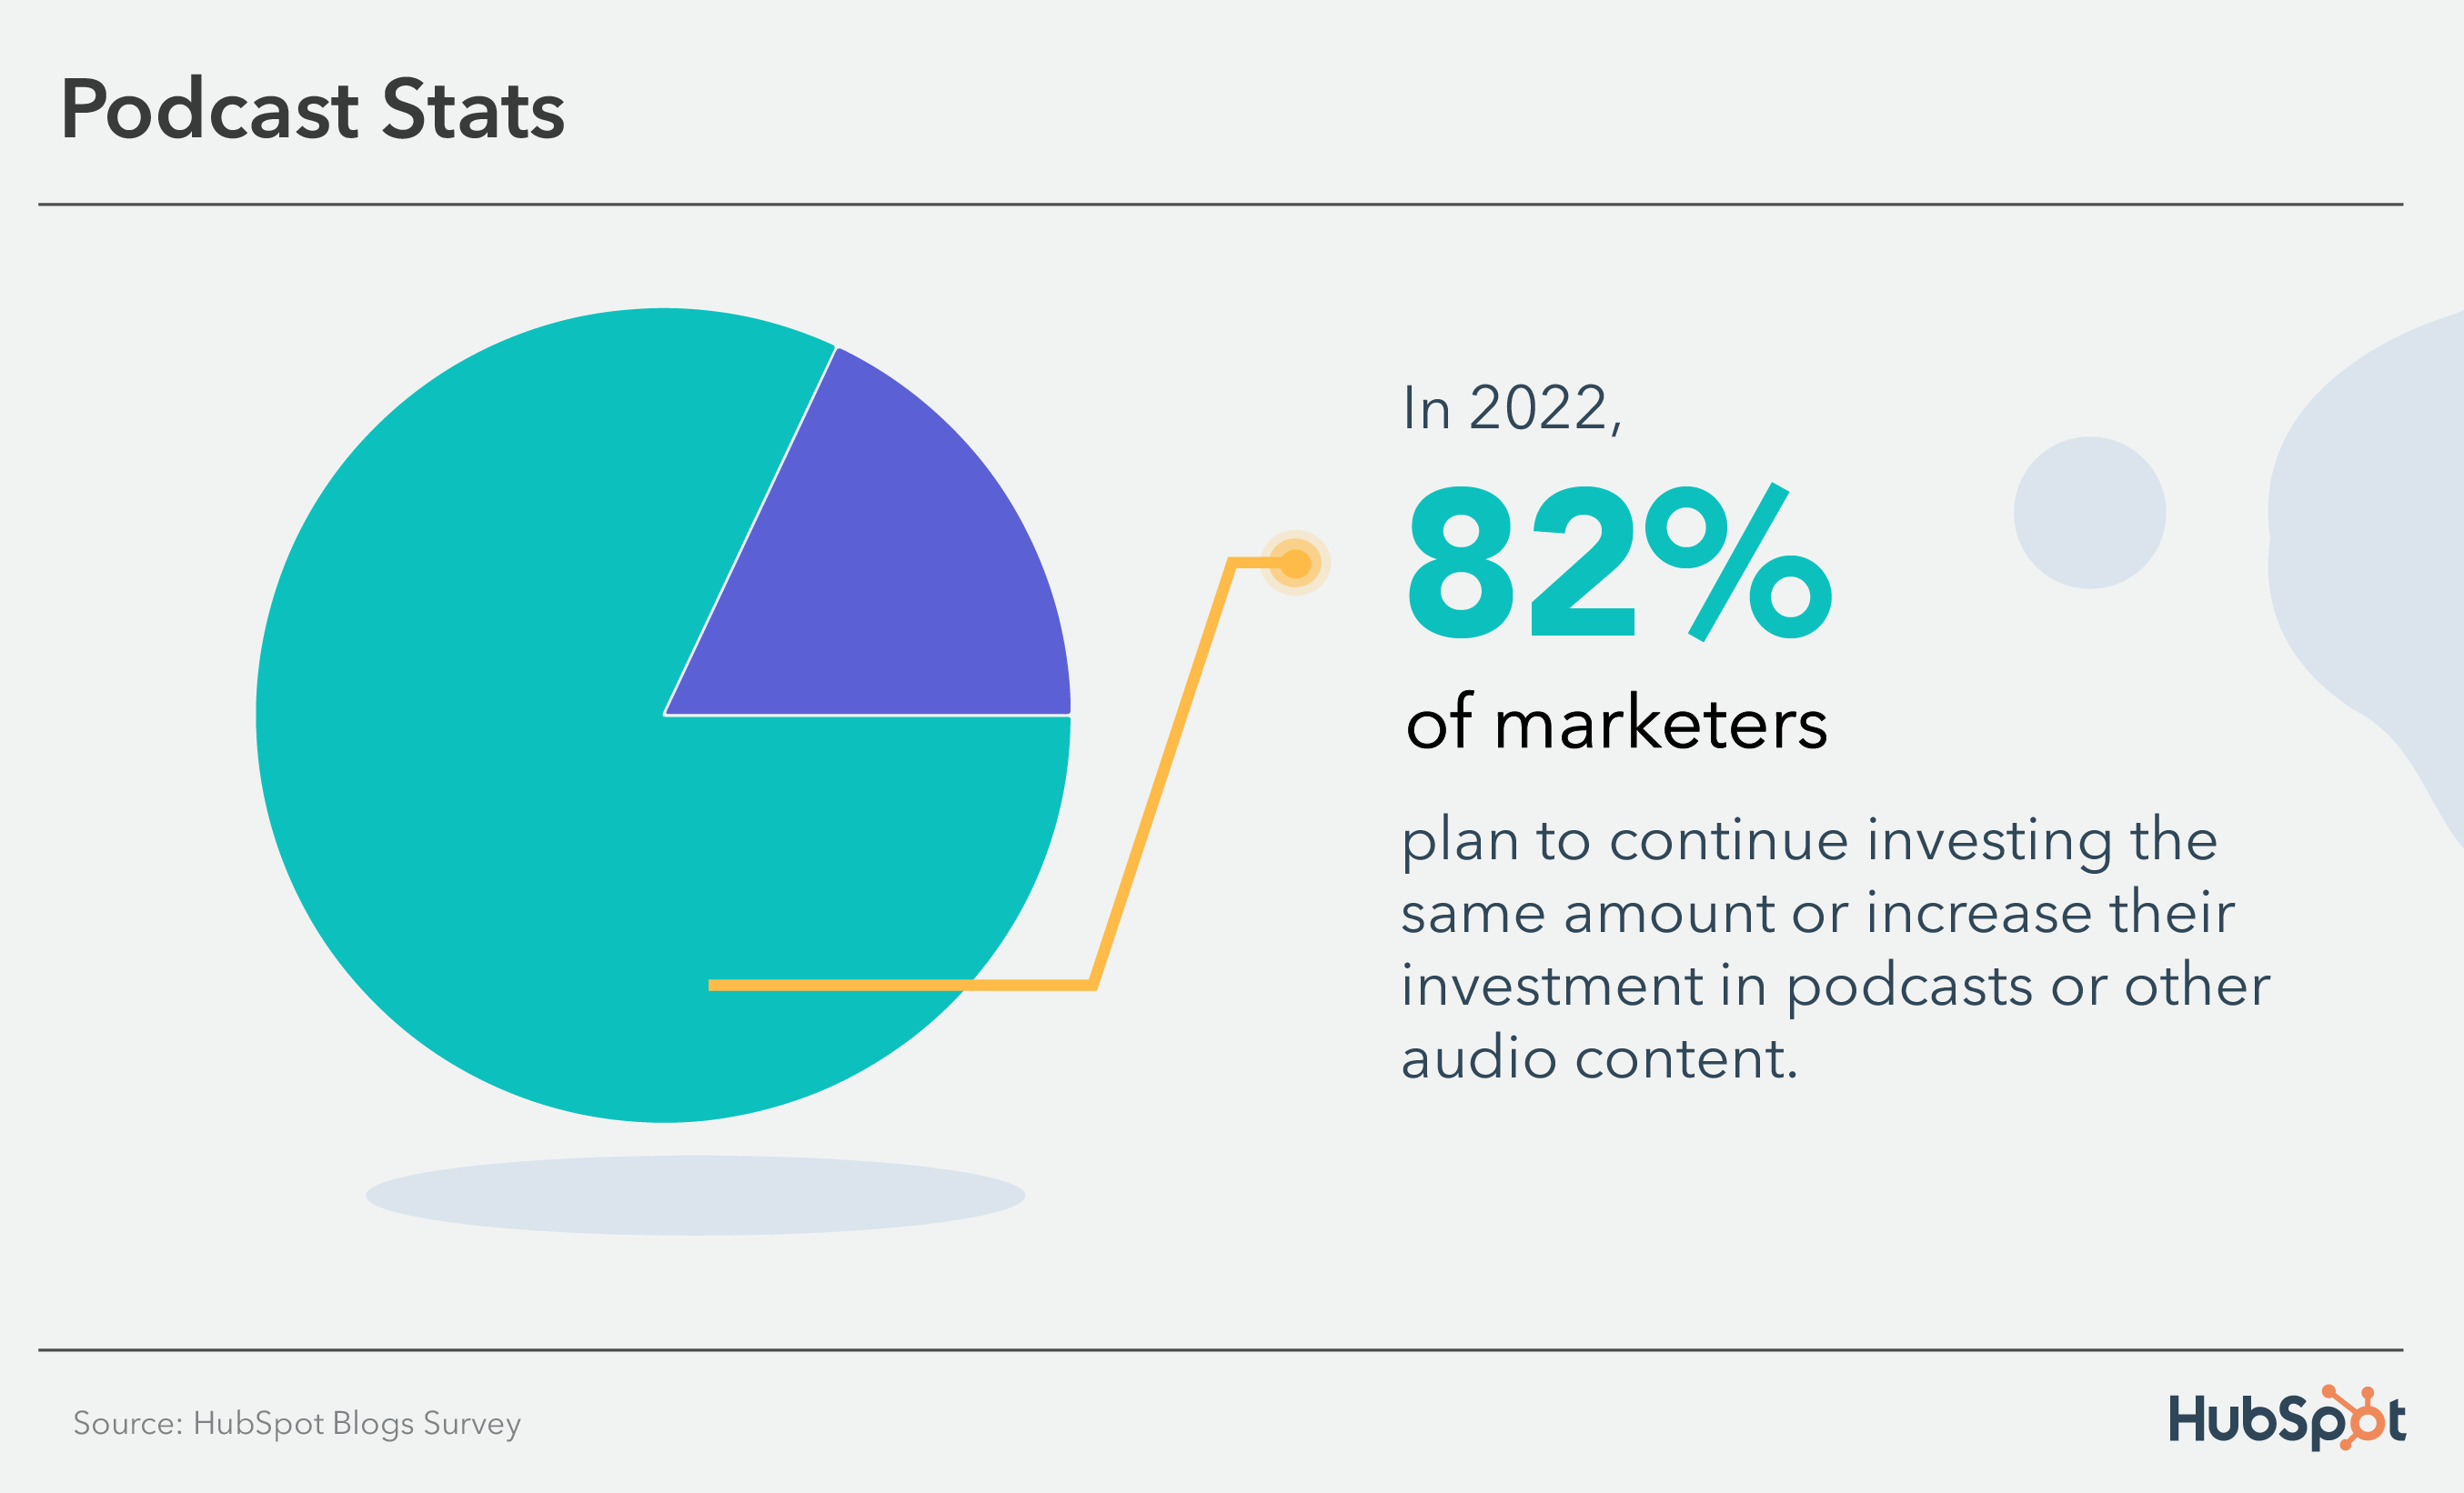 Podcast Stats: 82% of marketers plan to continue investing in audio content